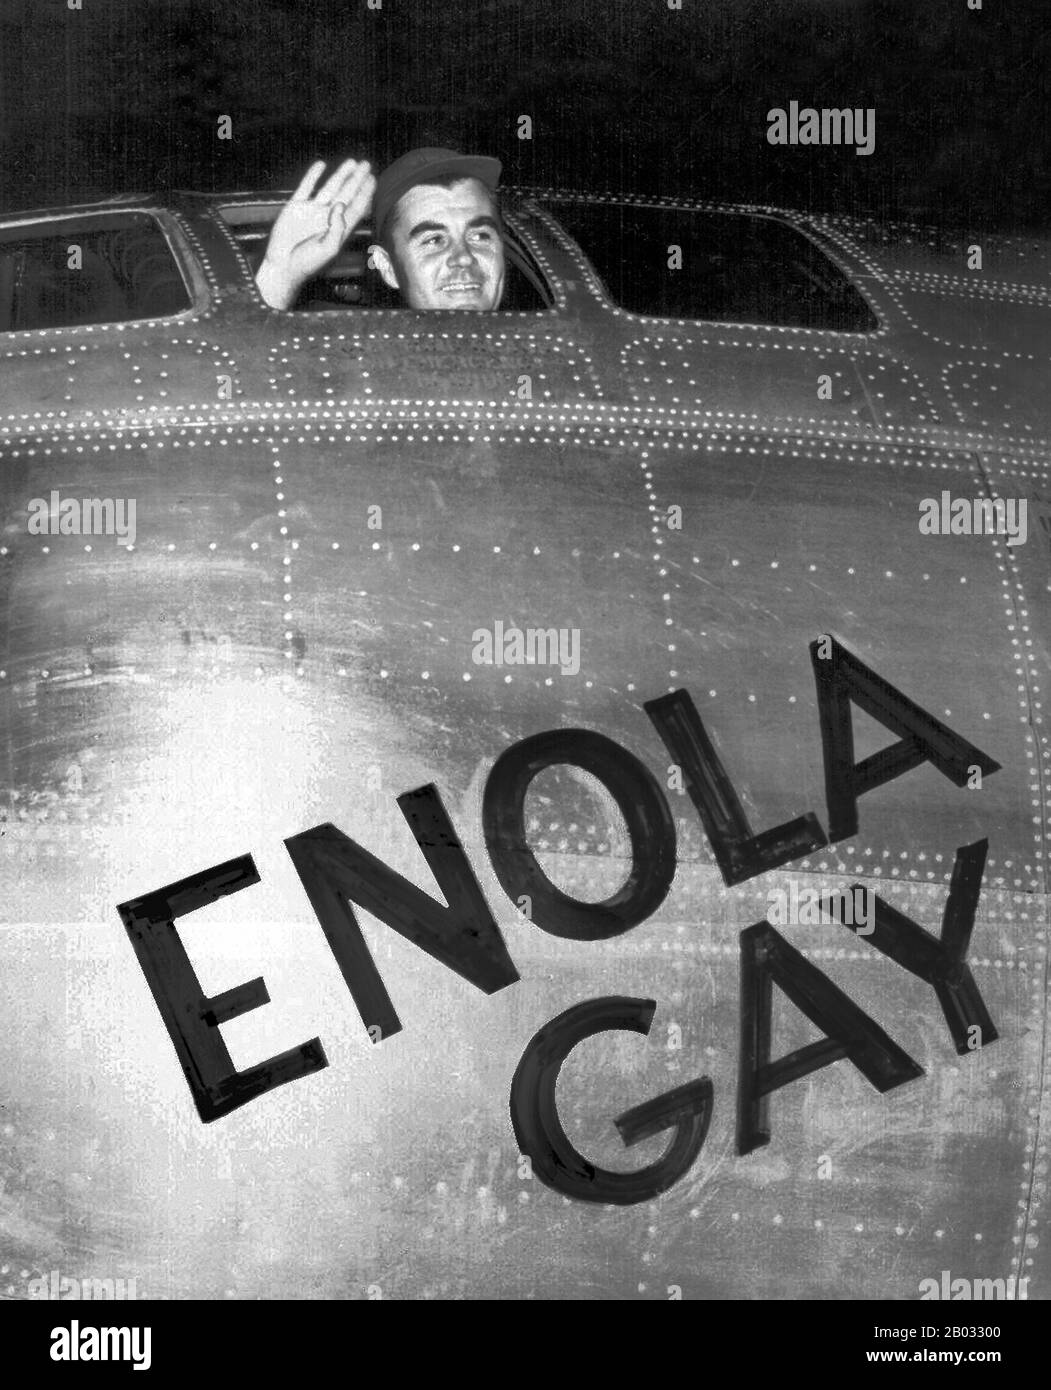 The Enola Gay is a Boeing B-29 Superfortress bomber named for Enola Gay Tibbets, the mother of the pilot, Colonel Paul Tibbets, who selected the aircraft while it was still on the assembly line. On 6 August 1945;, during the final stages of World War II, it became the first aircraft to drop an atomic bomb.  The bomb, code-named 'Little Boy', was targeted at the city of Hiroshima, Japan, and caused unprecedented destruction. Enola Gay participated in the second atomic attack as the weather reconnaissance aircraft for the primary target of Kokura. Clouds and drifting smoke resulted in Nagasaki b Stock Photo